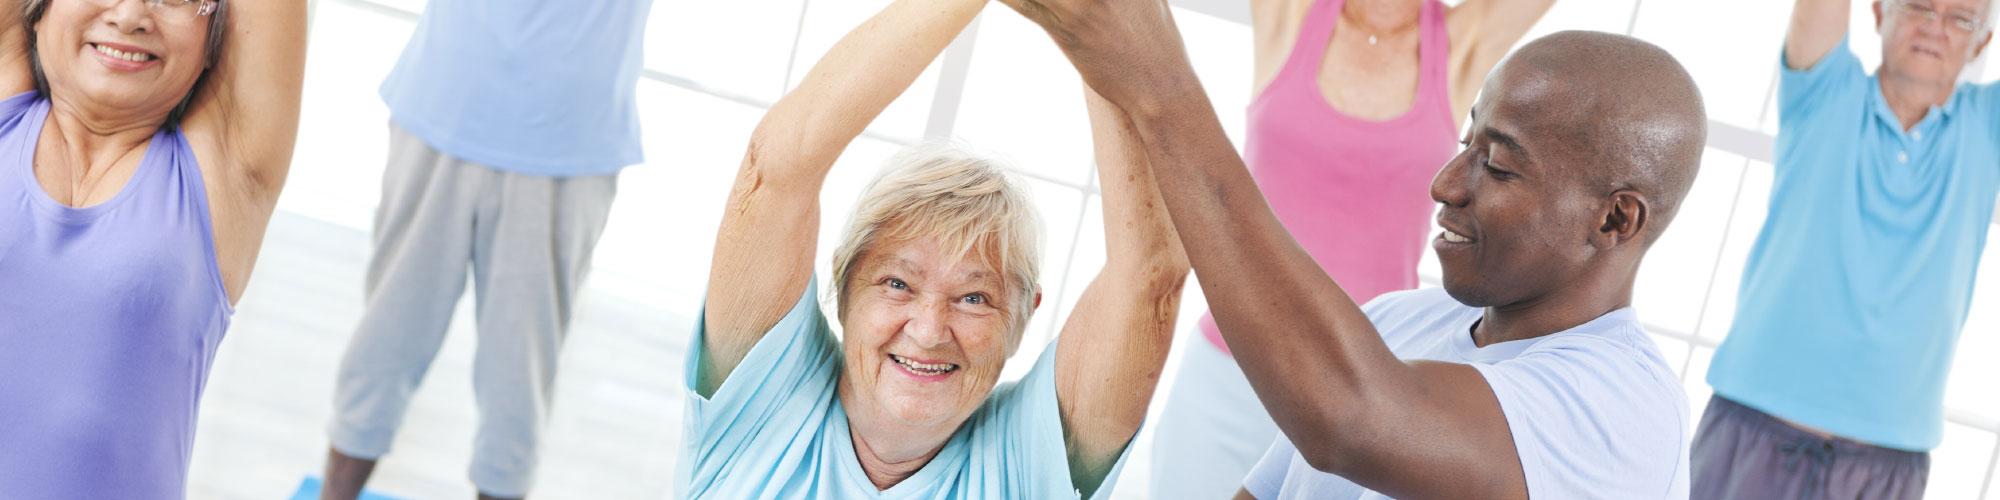 fitness coach helping a group of seniors exercise